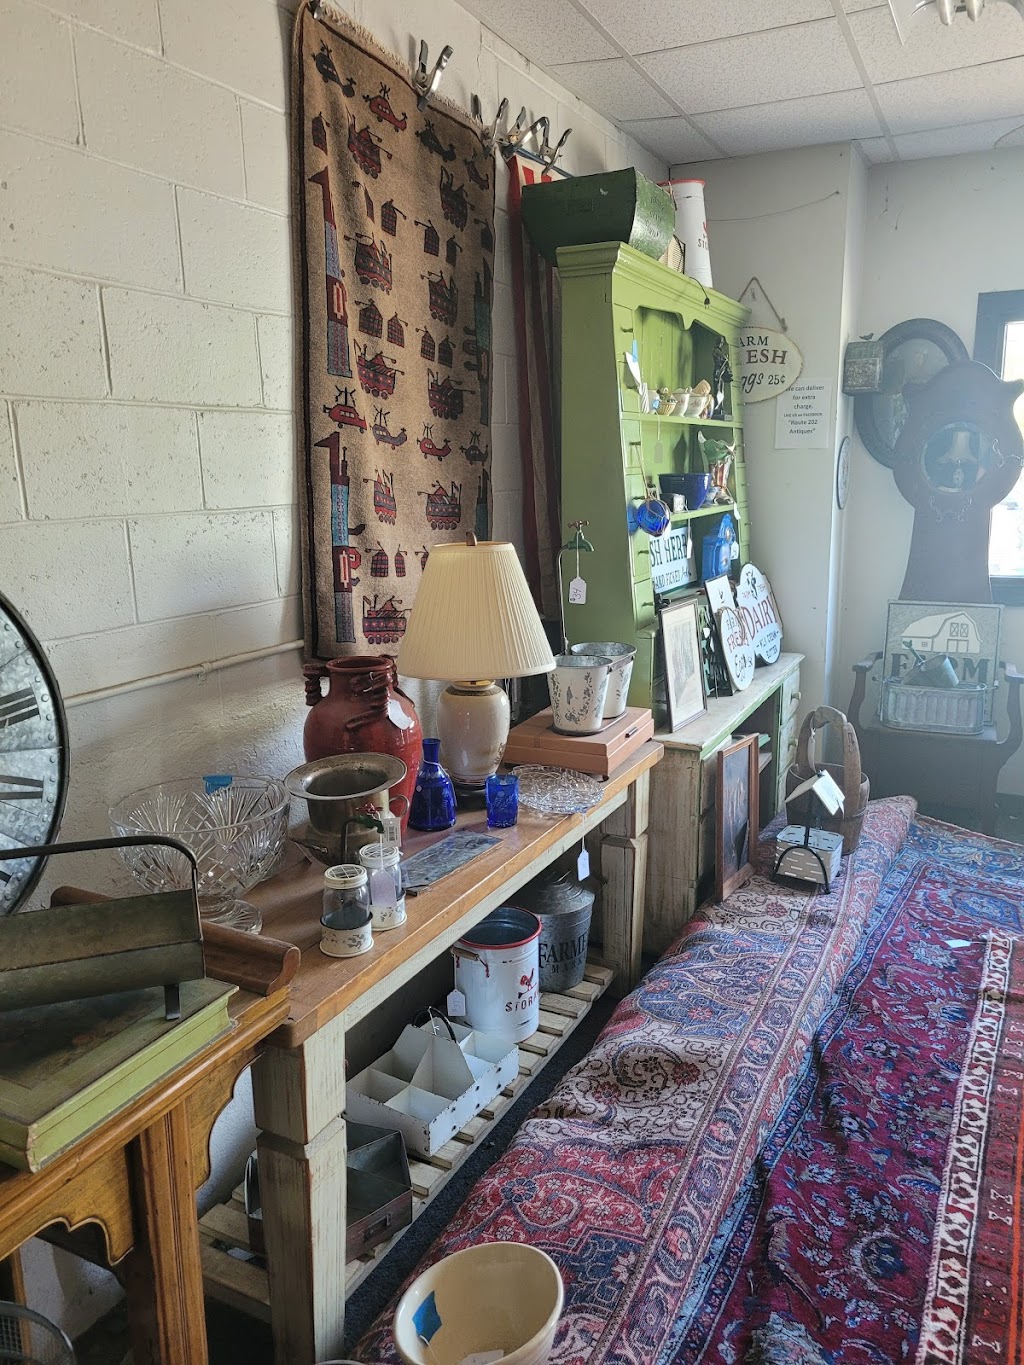 Route 202 Antiques | 869 N Rd, Westfield, MA 01085 | Phone: (413) 519-5643